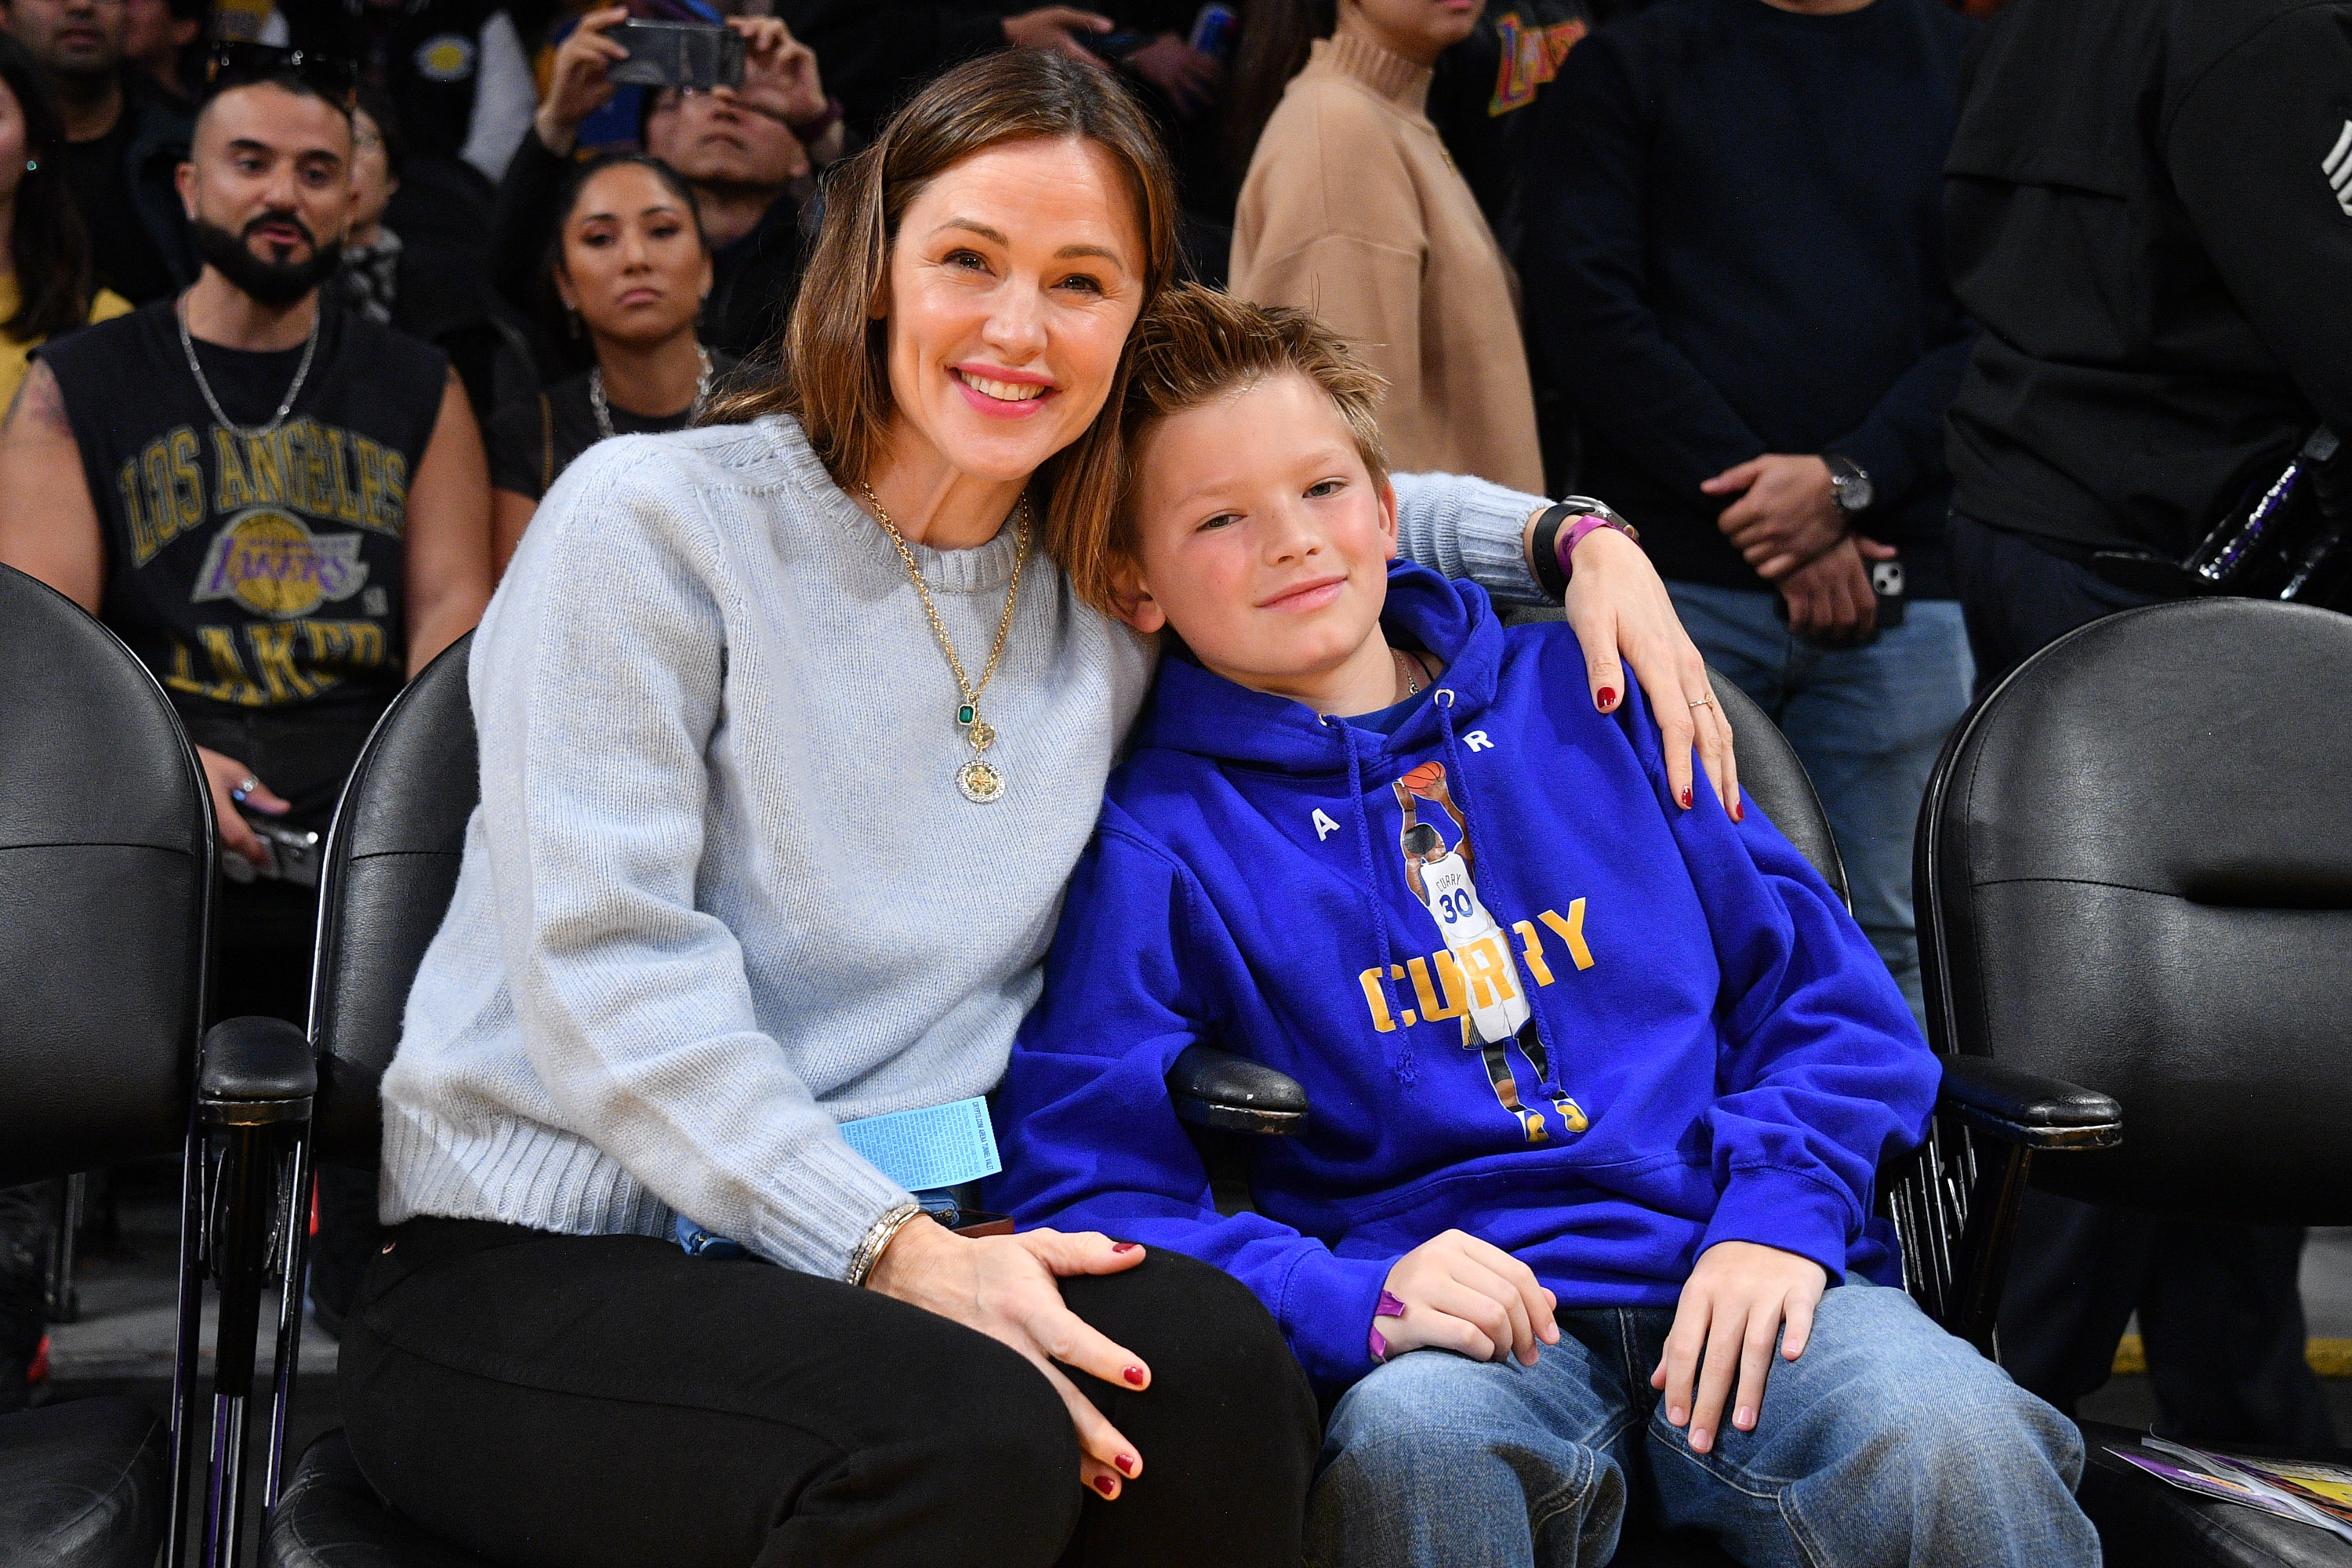 Jennifer Garner and Samuel Garner Affleck smile as they watch the basketball game between the Los Angeles Lakers and the Golden State Warriors at the Crypto.com Arena on March 5, 2023, in Los Angeles, California. | Source: Getty Images